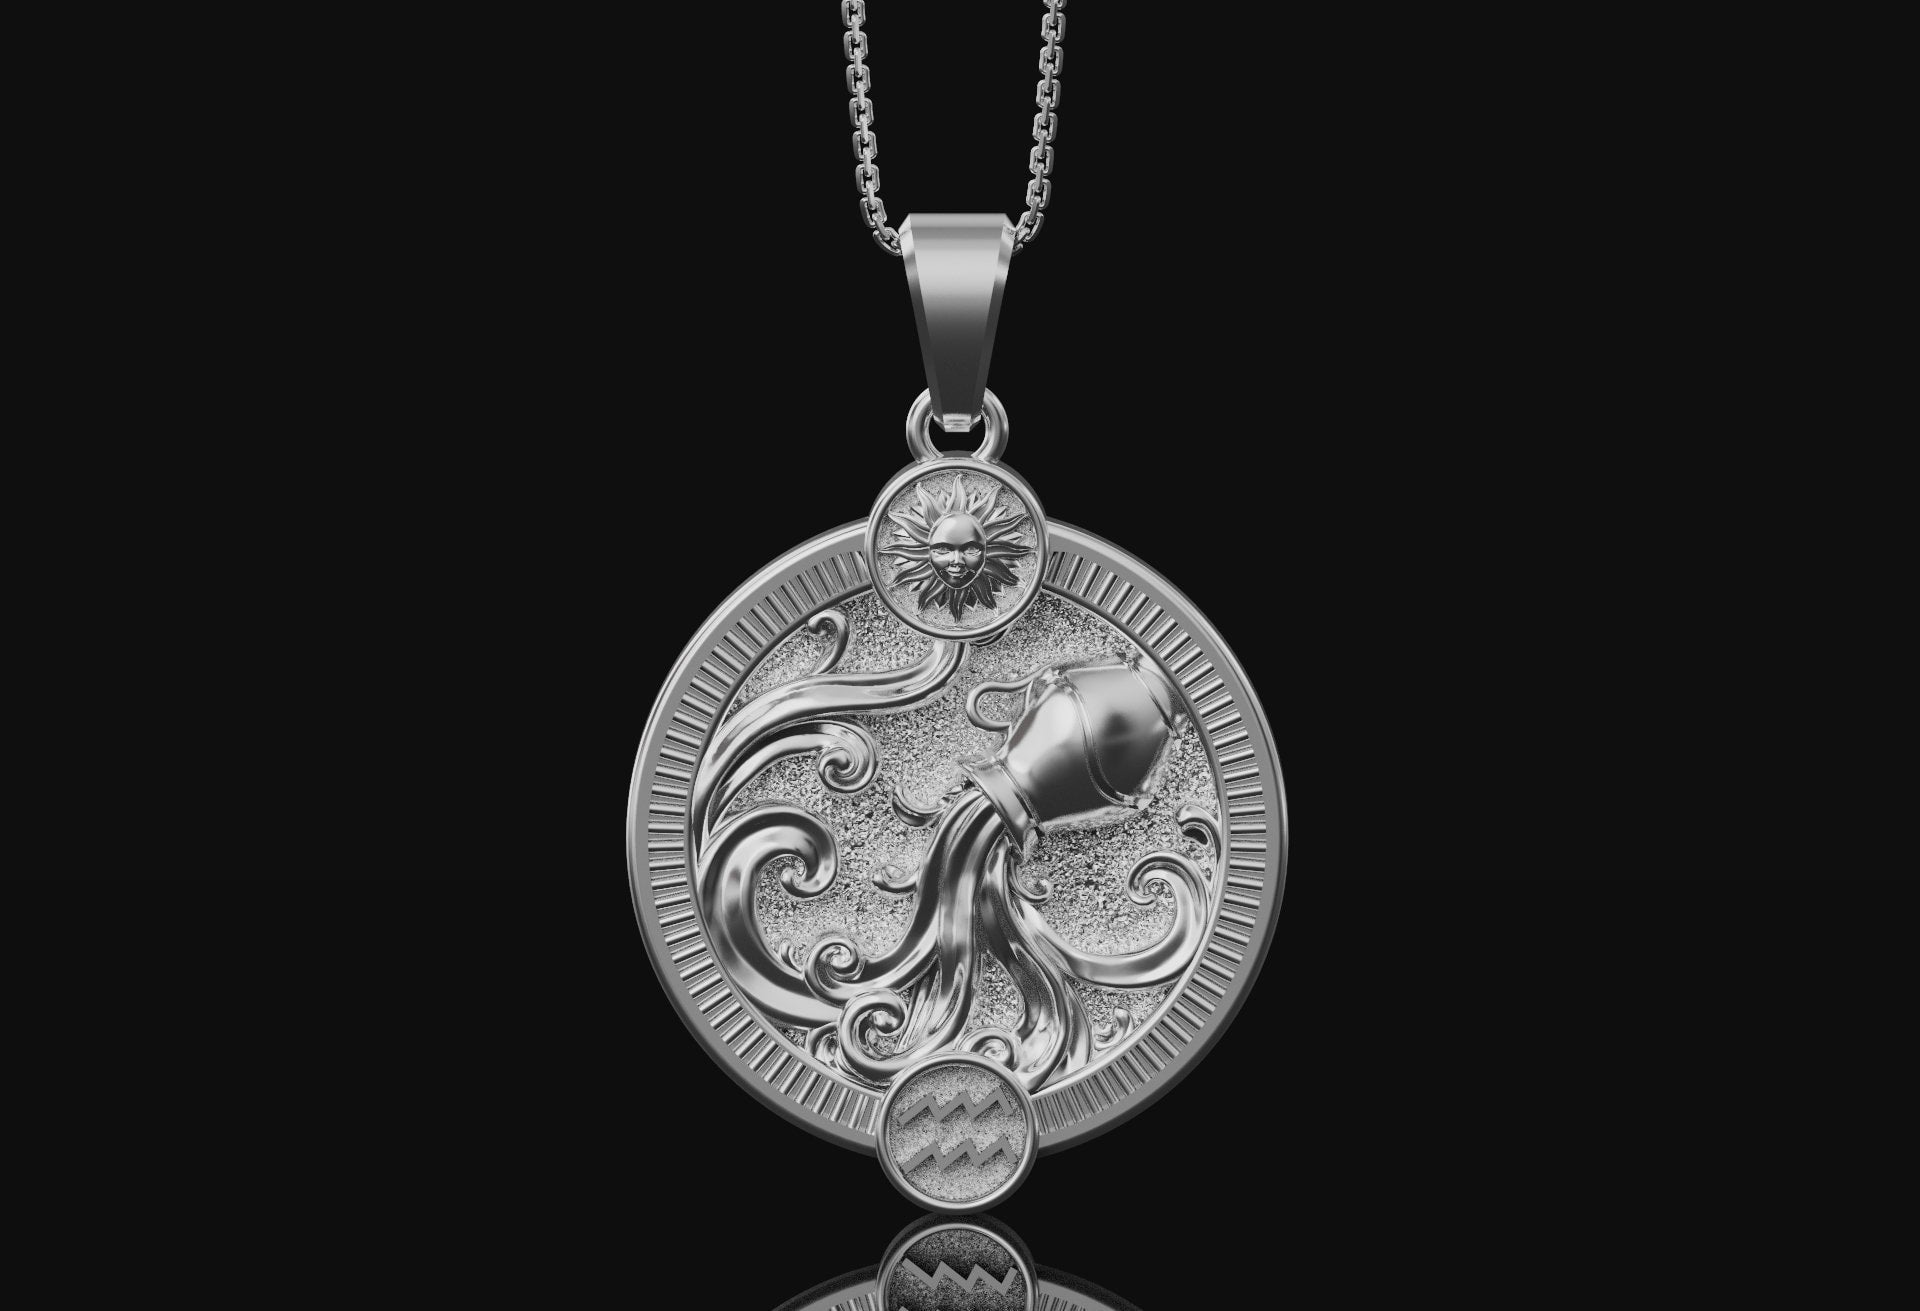 Aquarius Handmade Sterling Silver Necklace Polished Finish